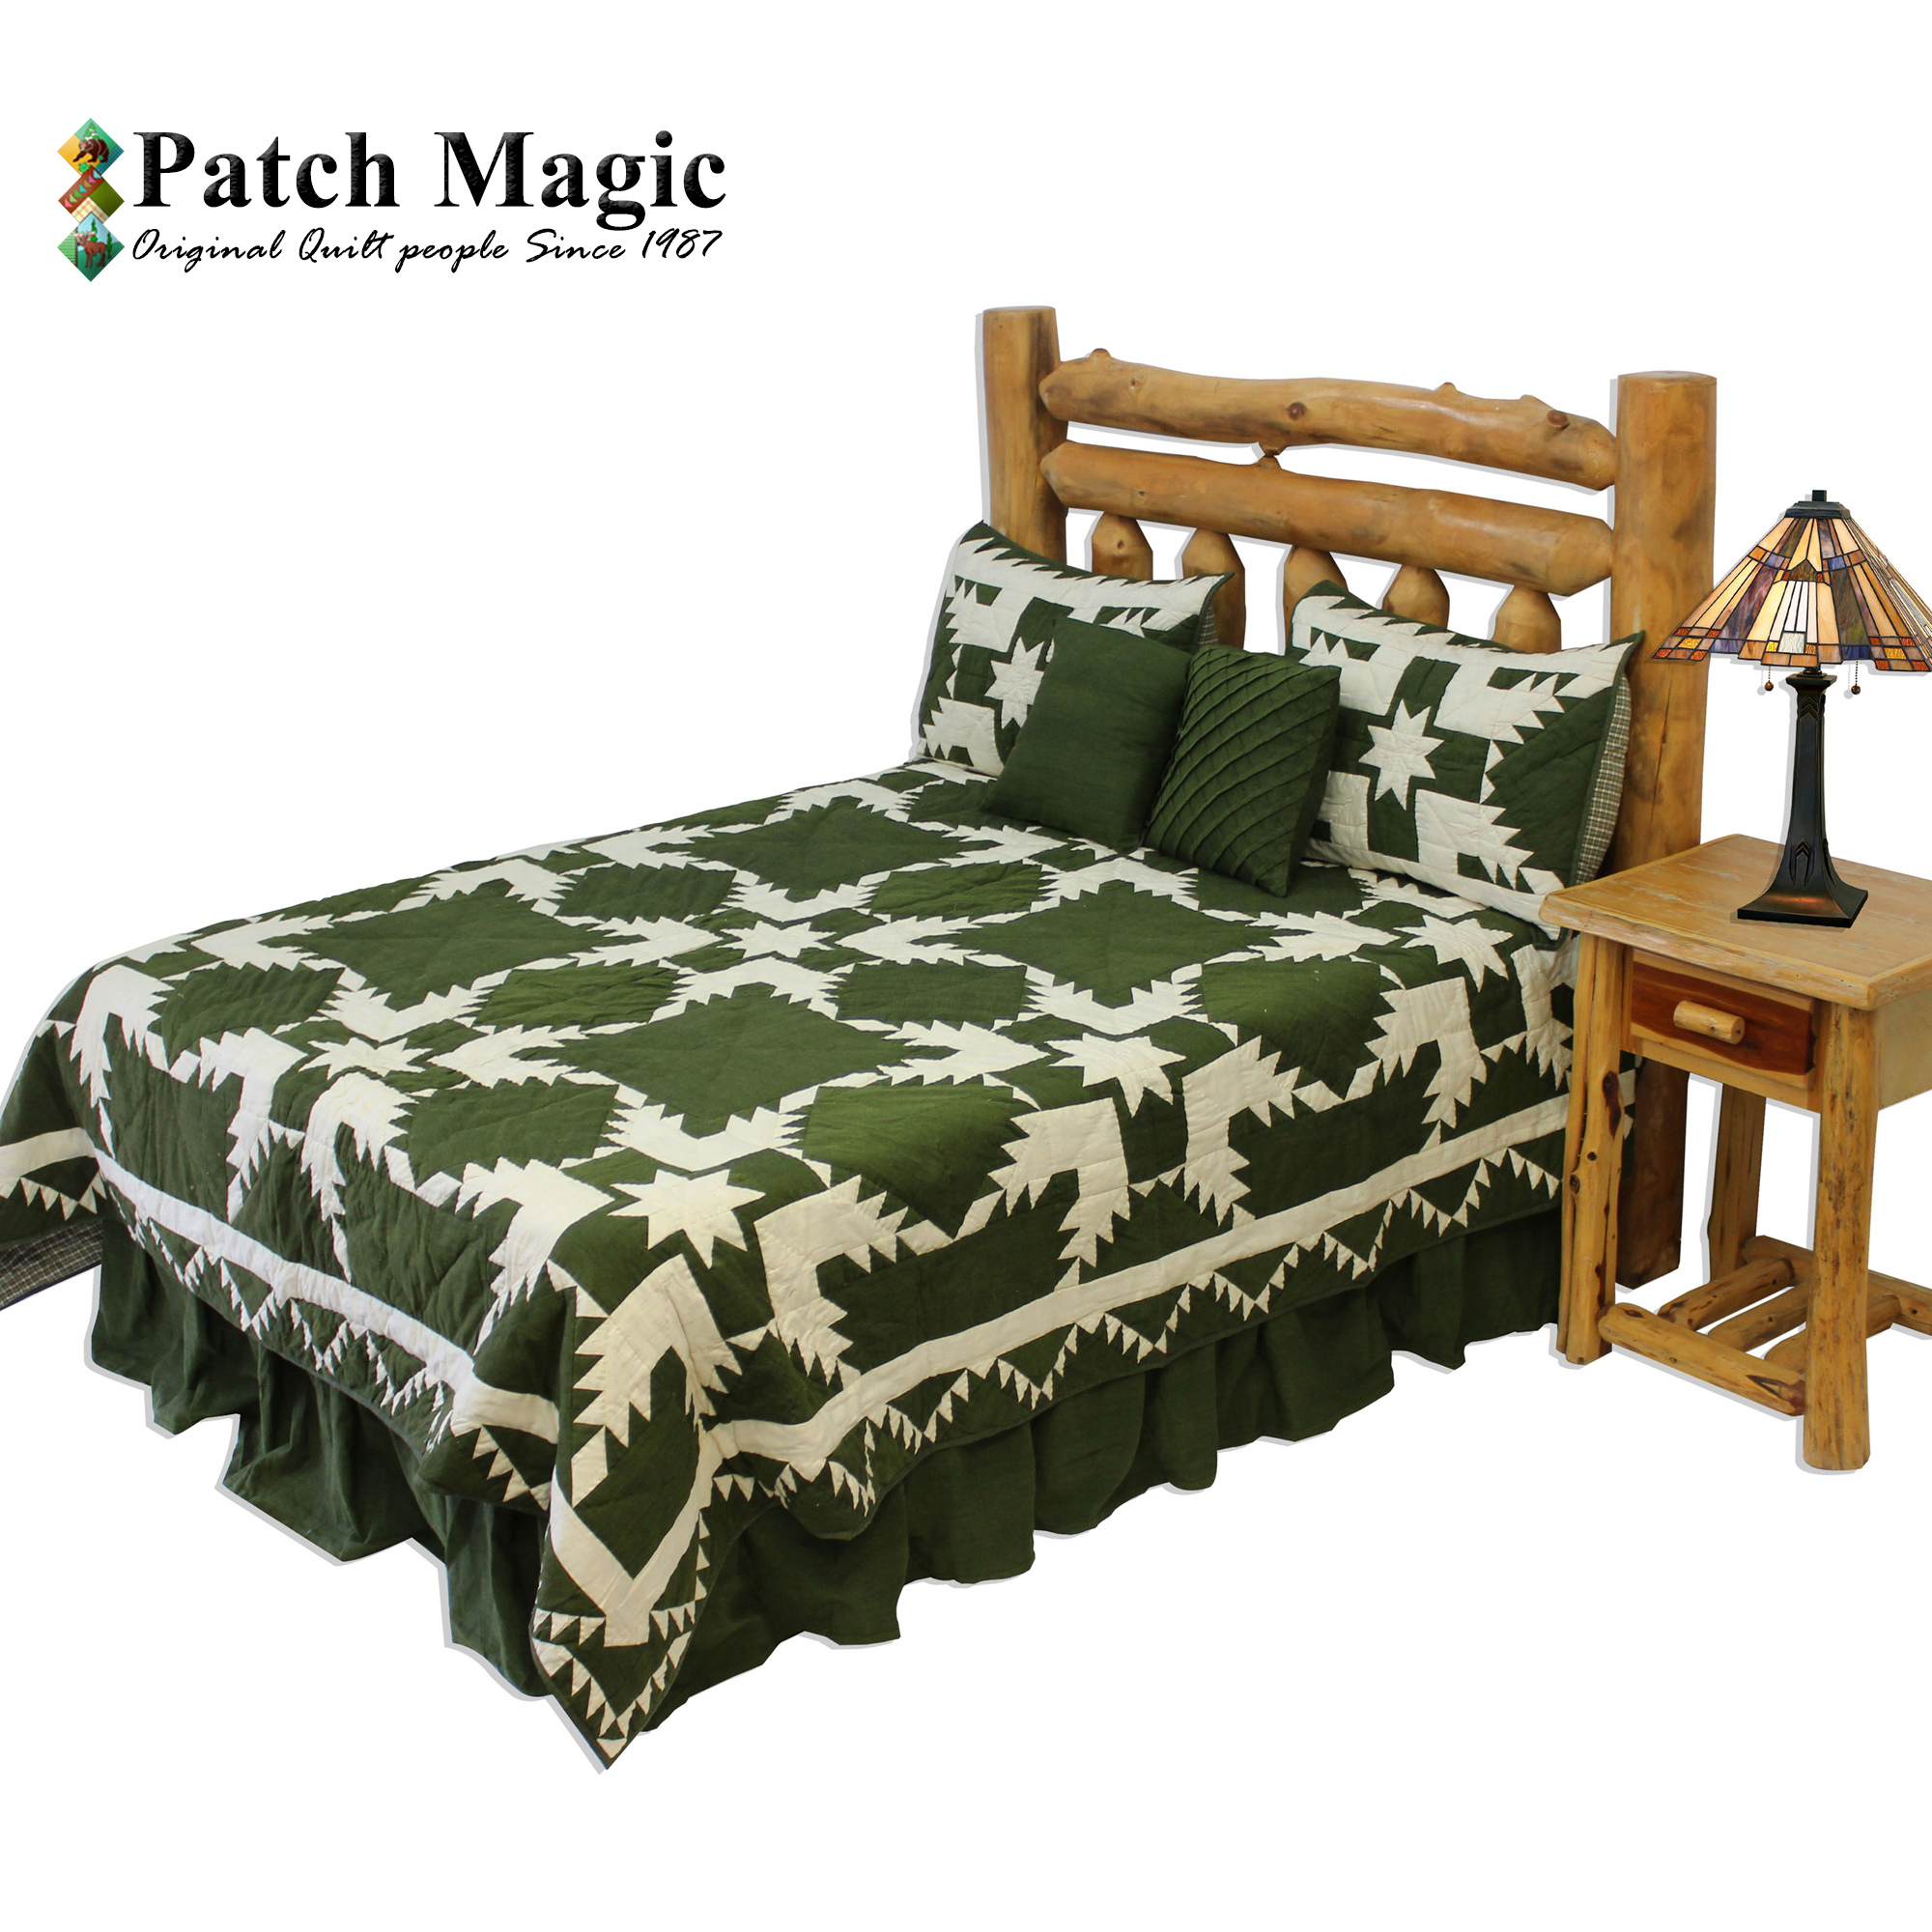 Green Feathered Star Queen Quilt 85"W x 95"L